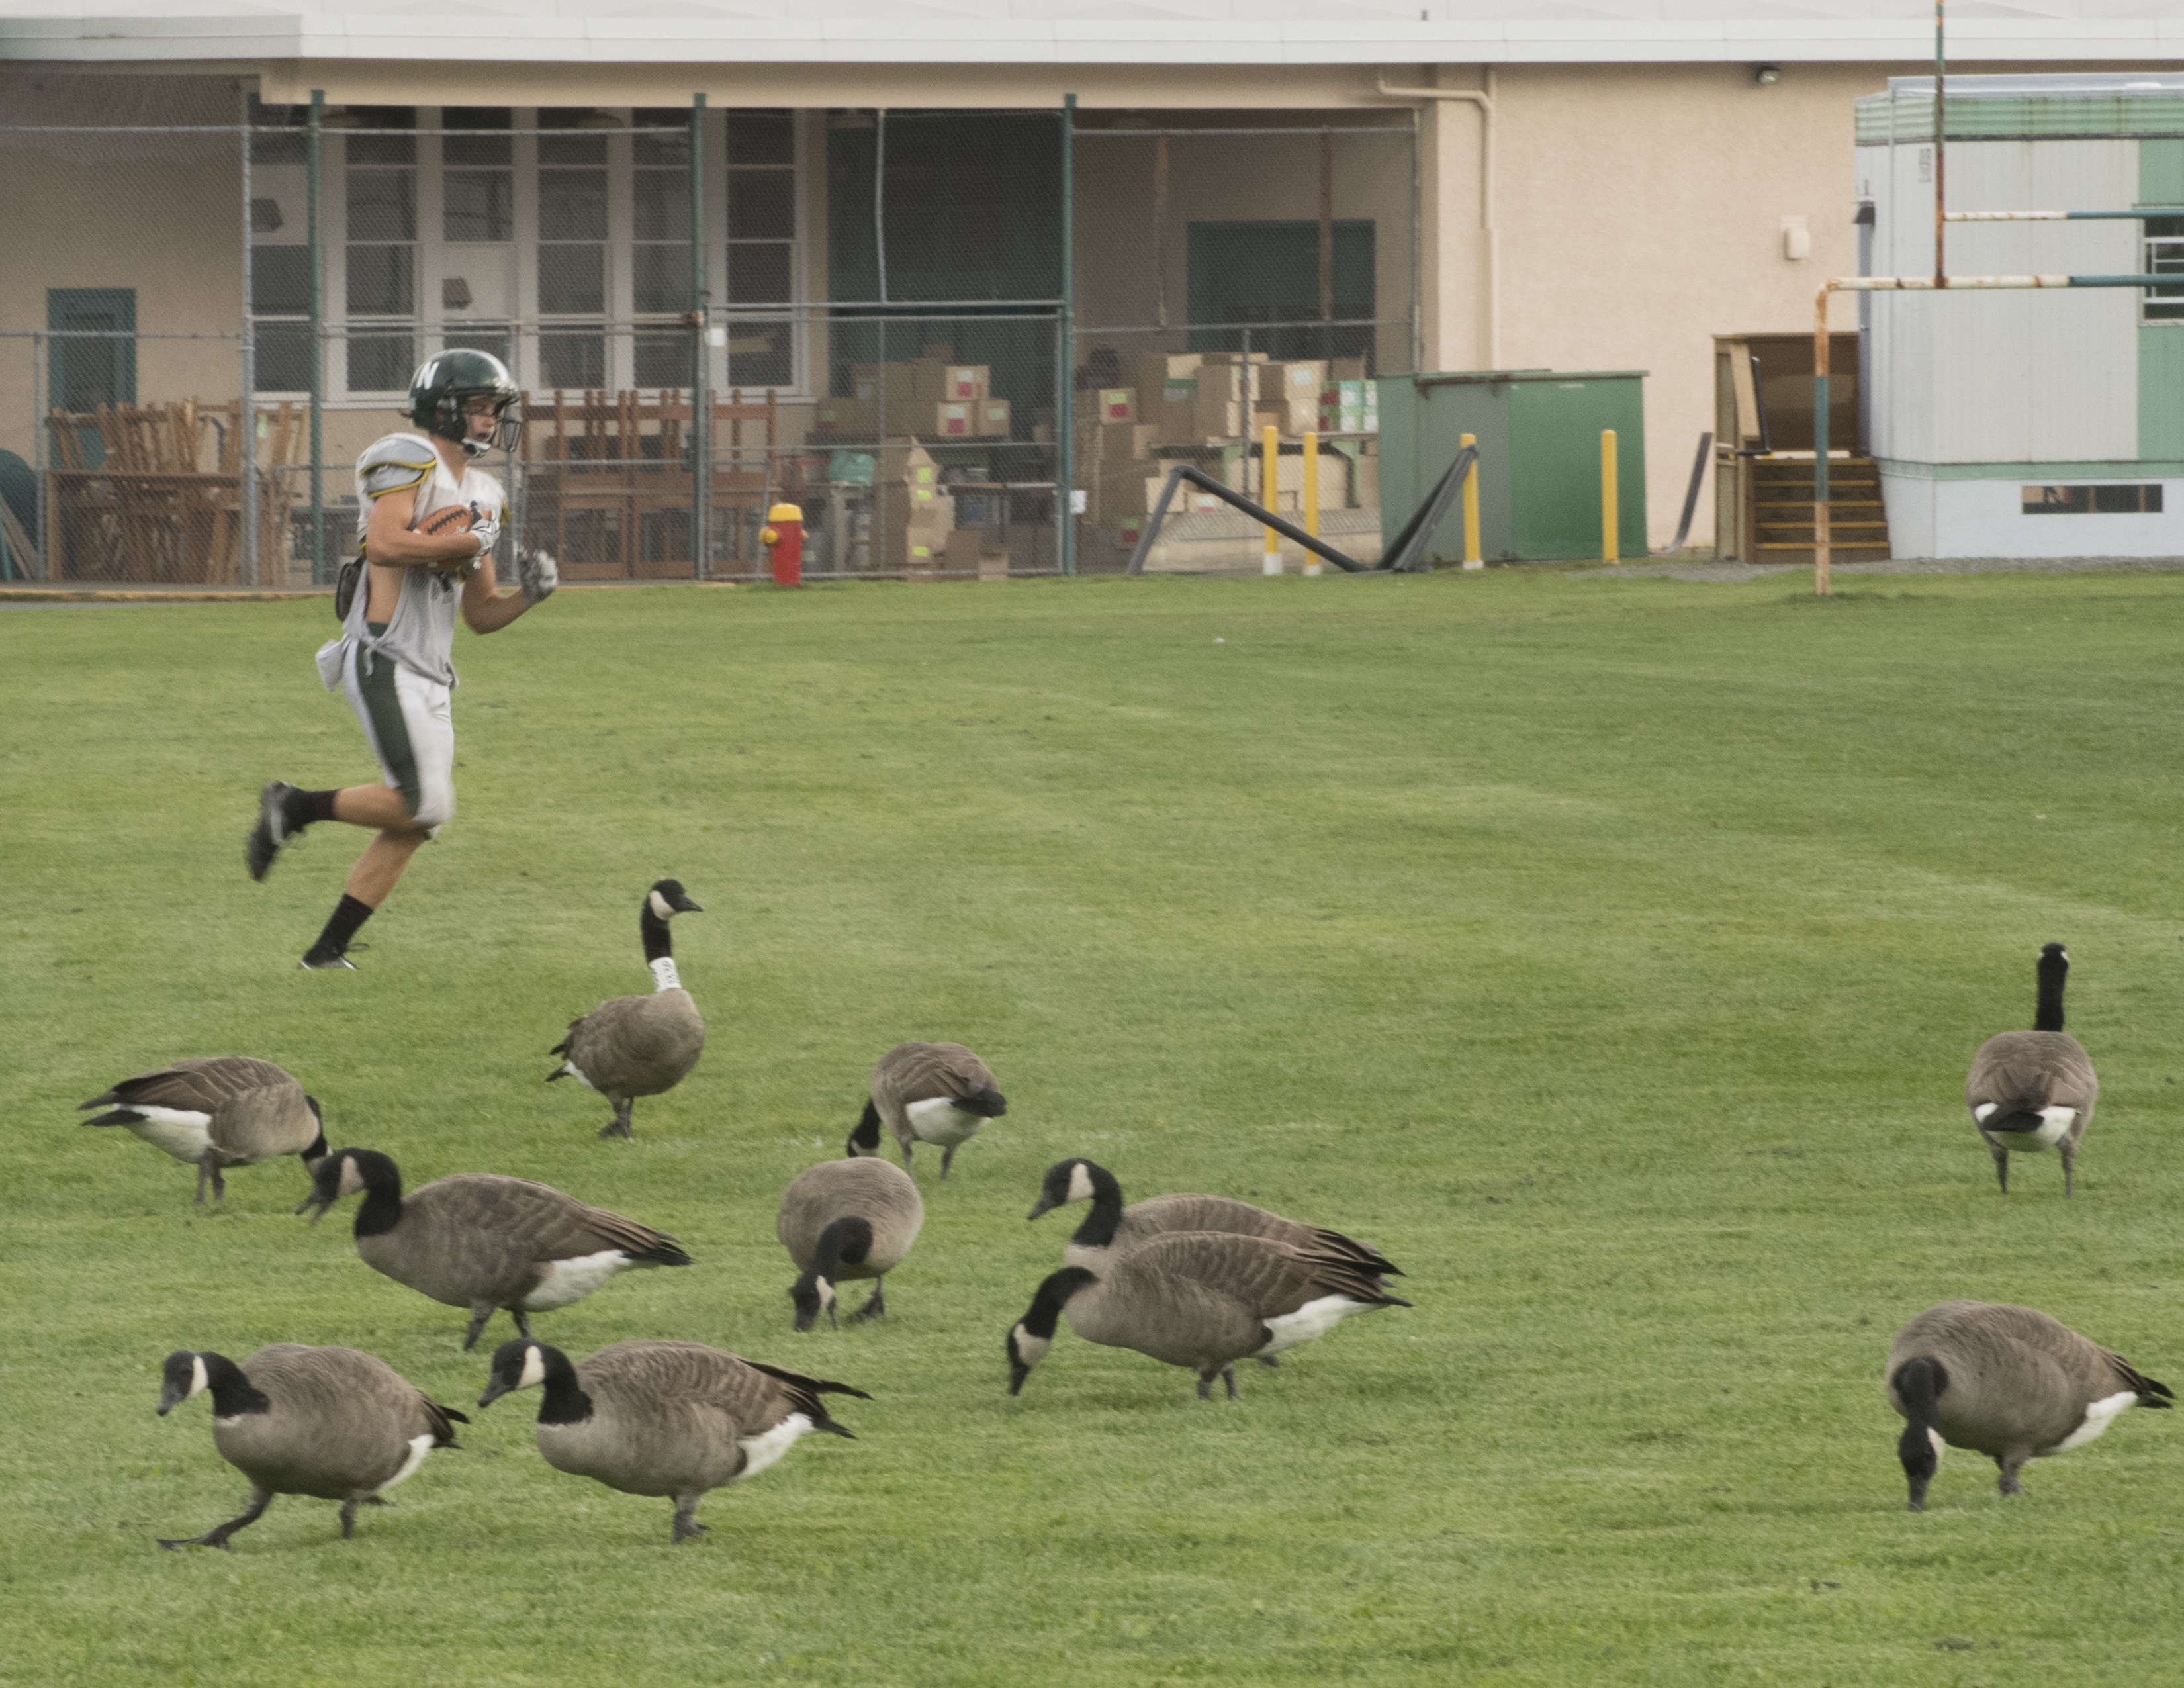 Some geese are very accustomed to "sharing" their turf - Ken Langelier Photo